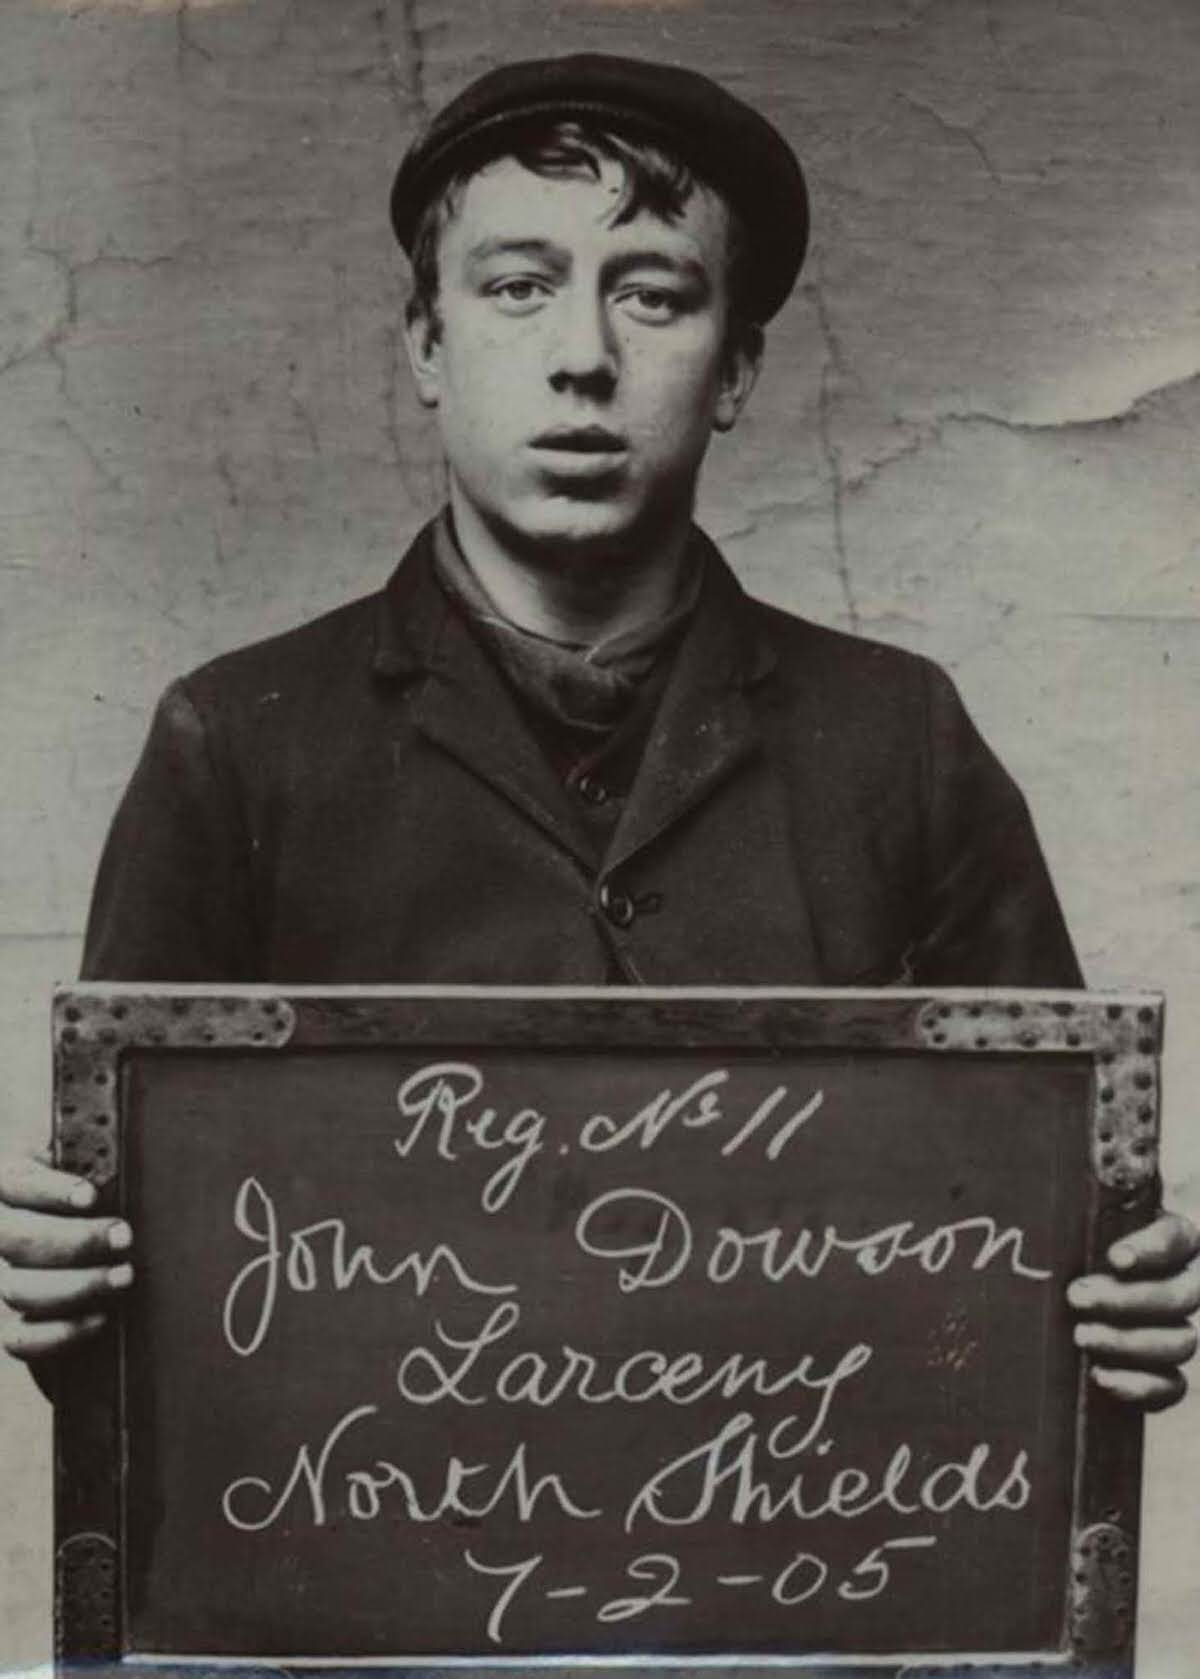 John Dowson, 19, arrested for stealing from a gas meter, 1905.